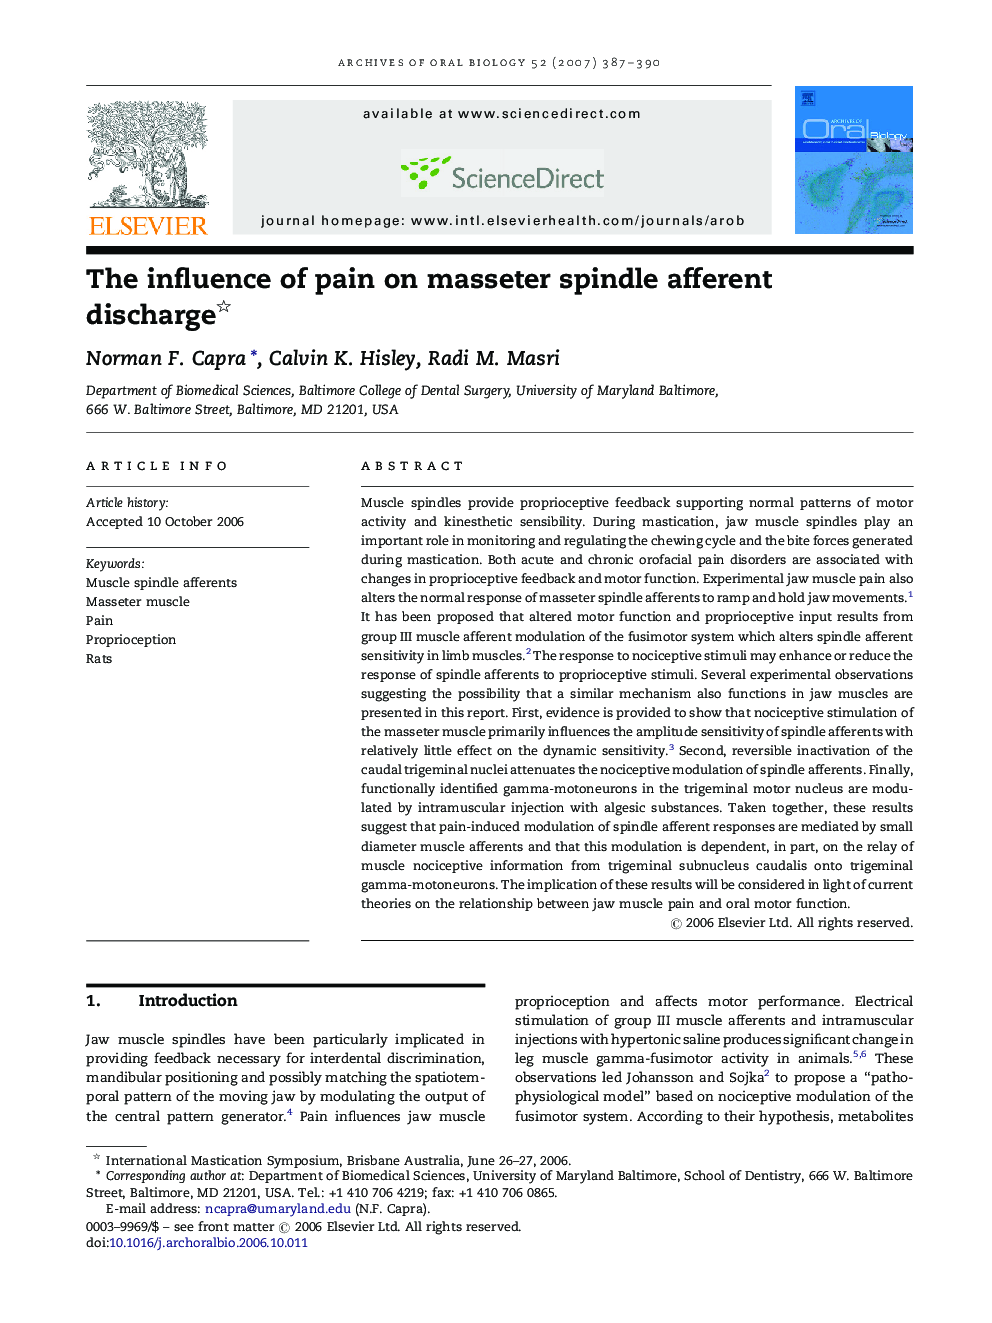 The influence of pain on masseter spindle afferent discharge 